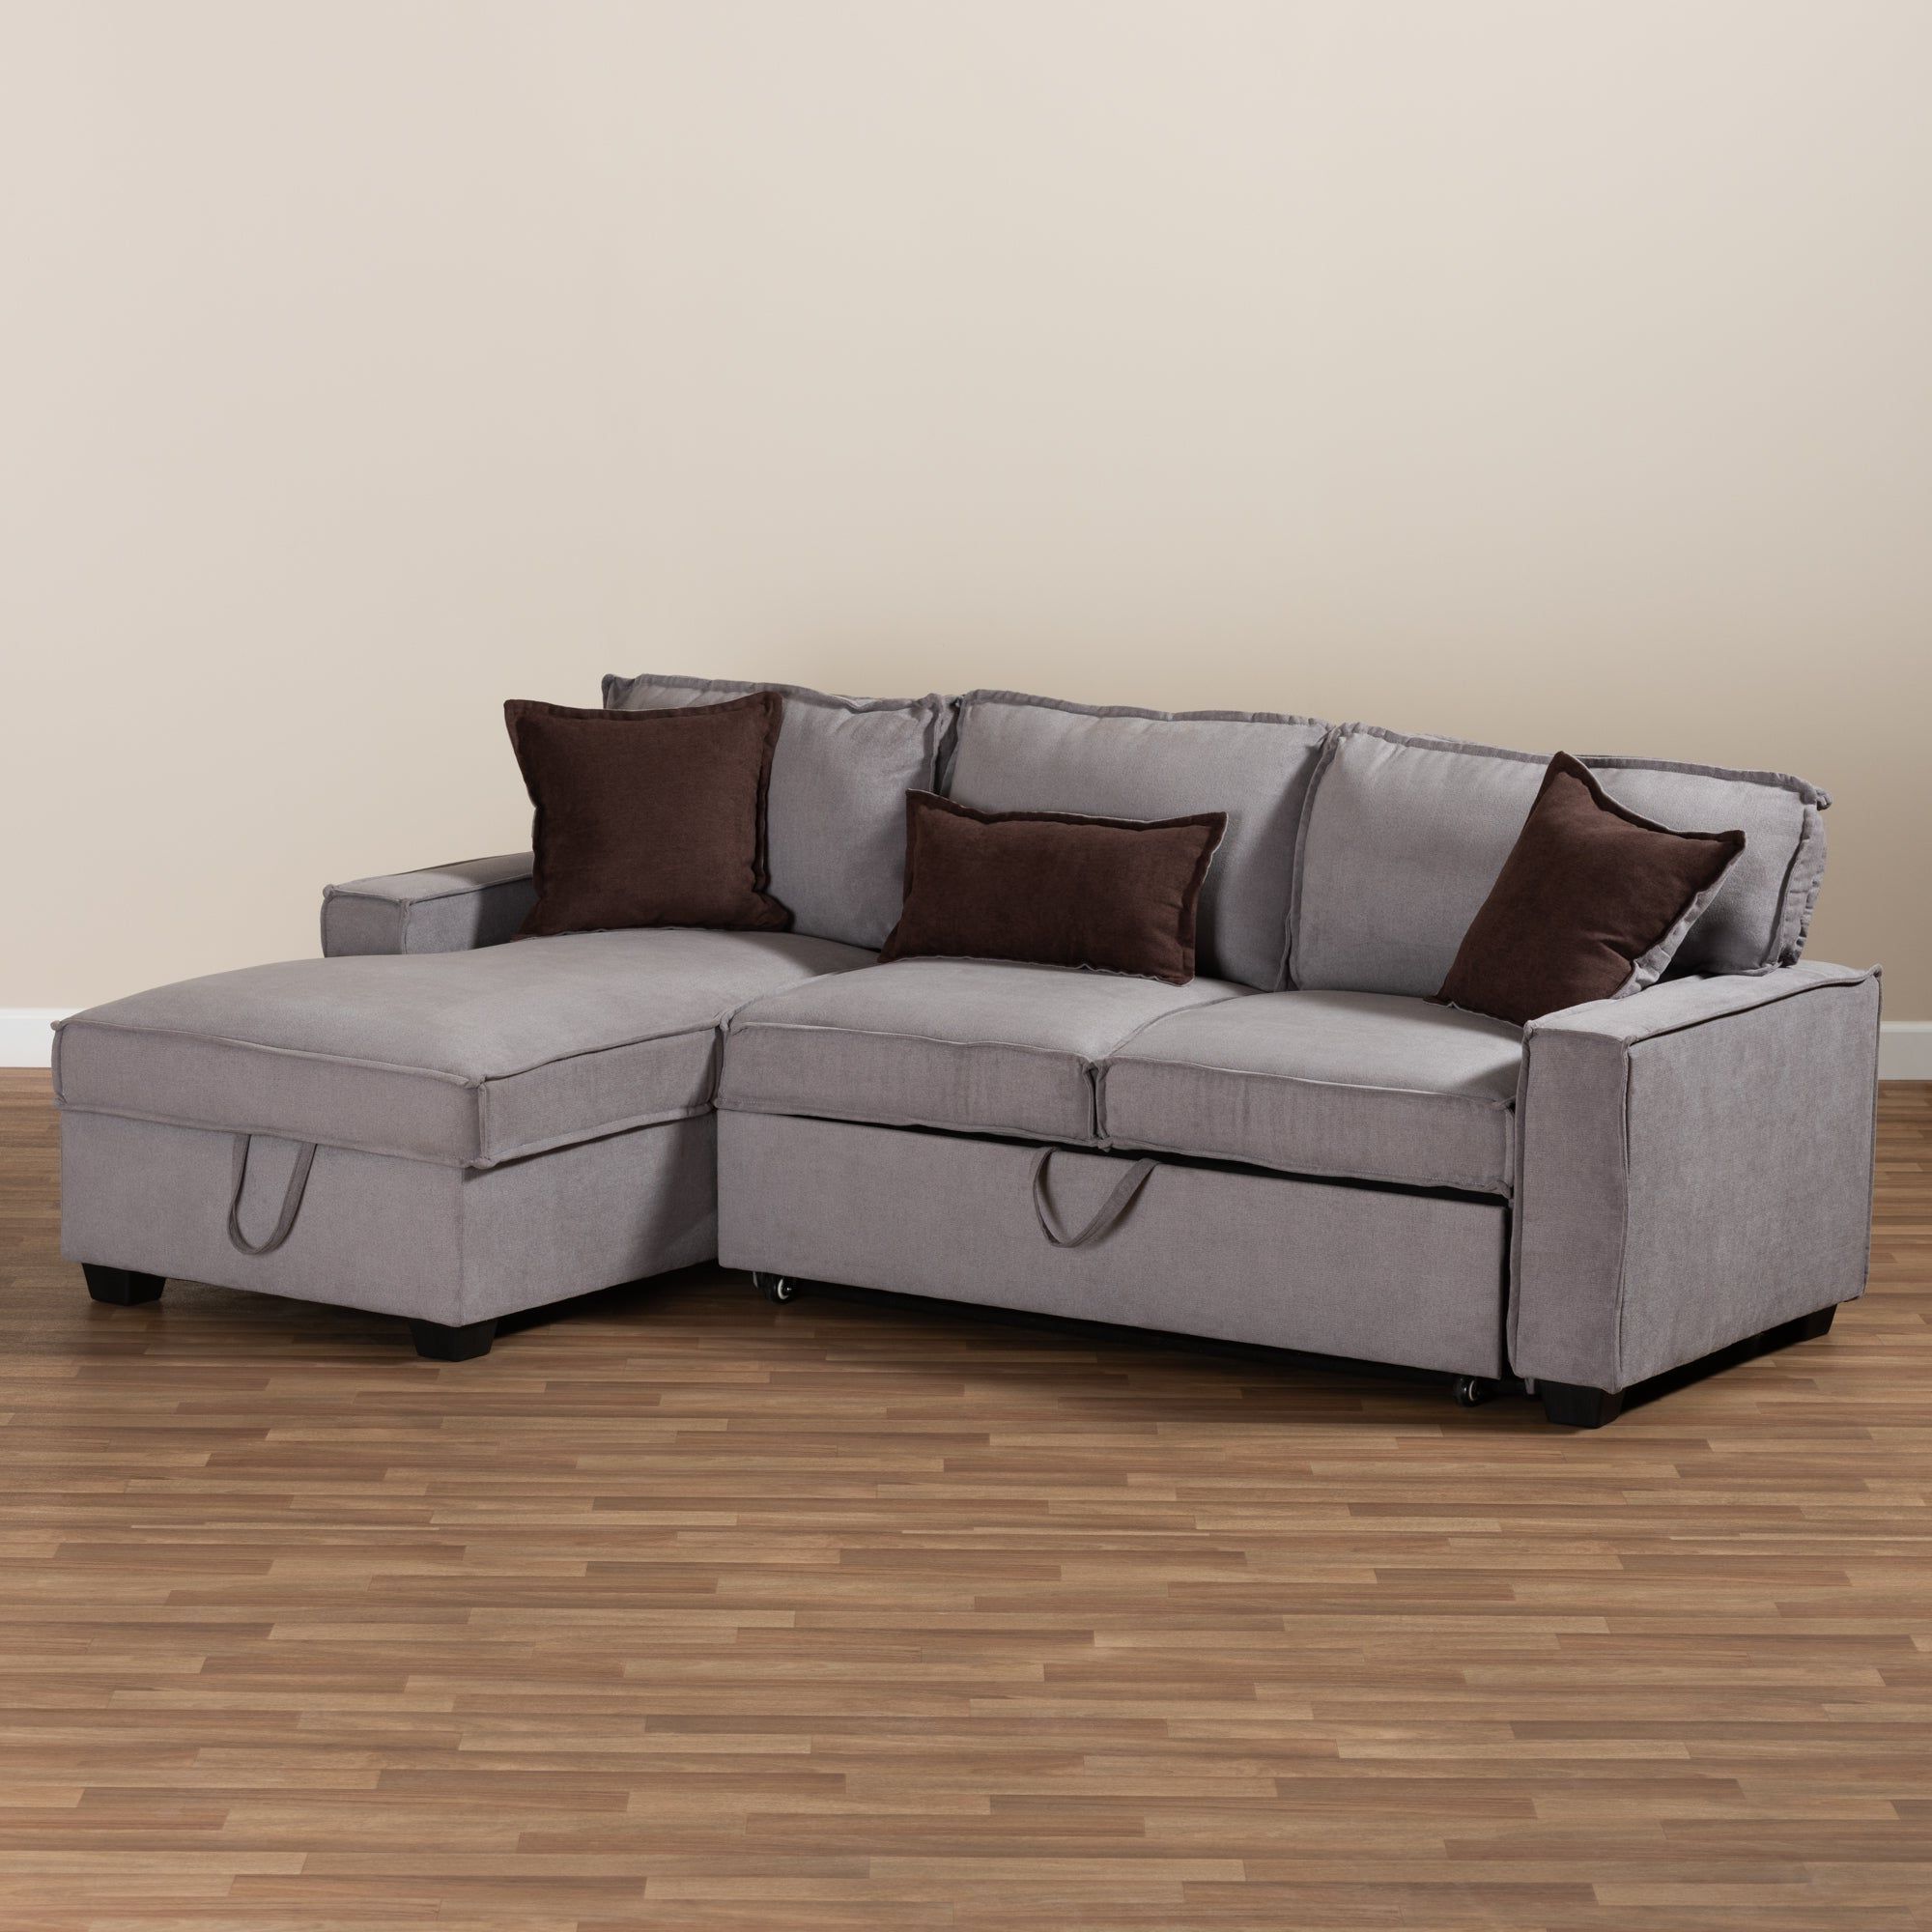 Well Known Right Facing Black Sofas Regarding Functioning As A Sofa, Bed, And Storage All In One, The Emile Sofa Is A (View 6 of 15)